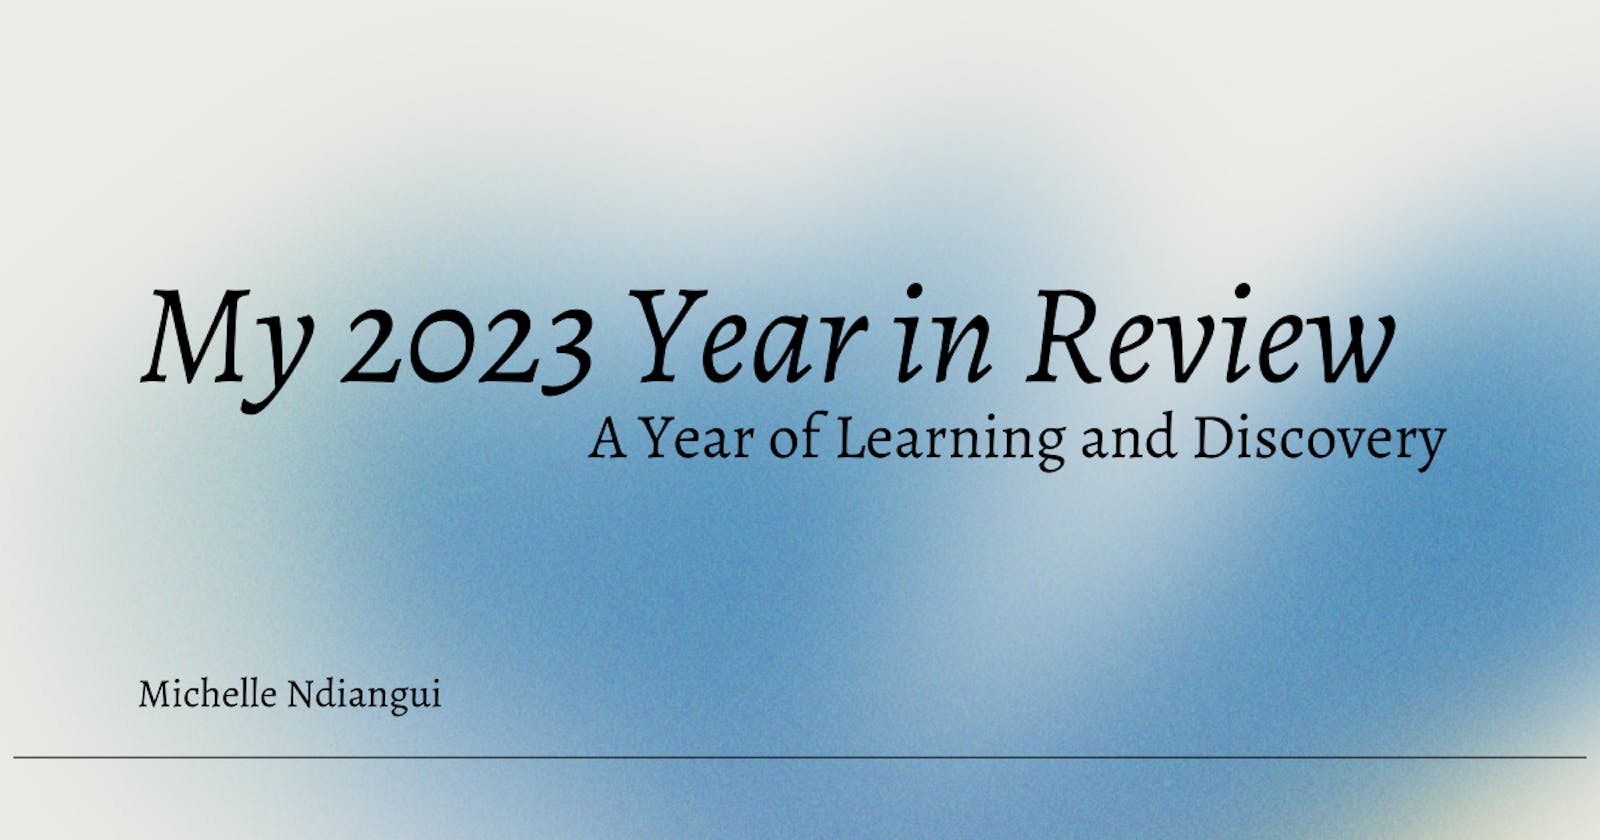 My 2023 Year in Review: A Year of Discovery and Learning